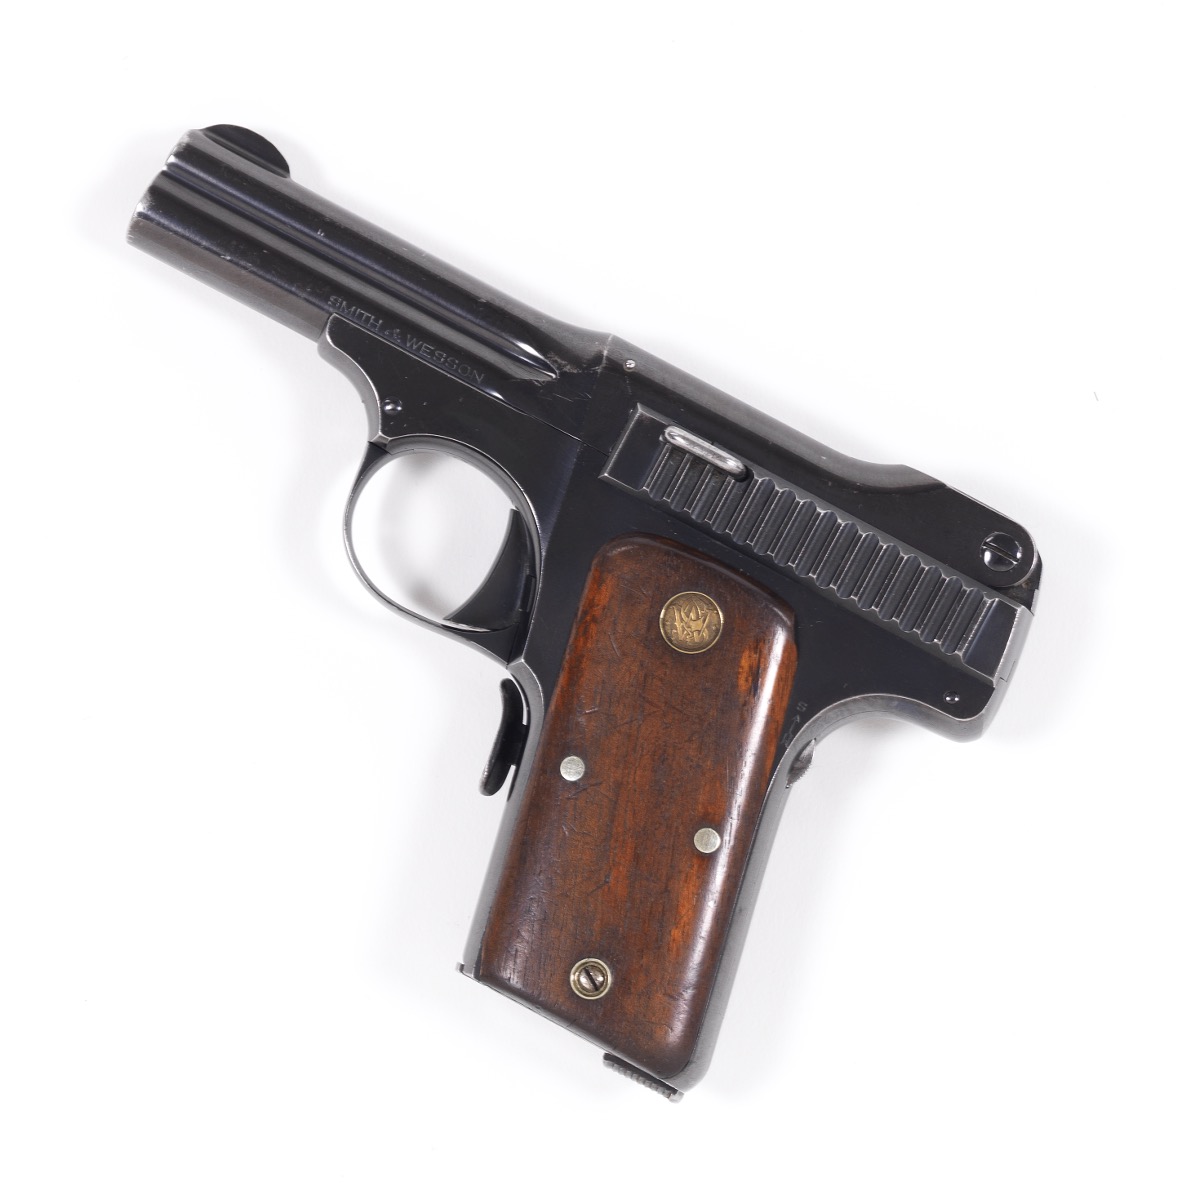 Serial numbers wesson and Smith and